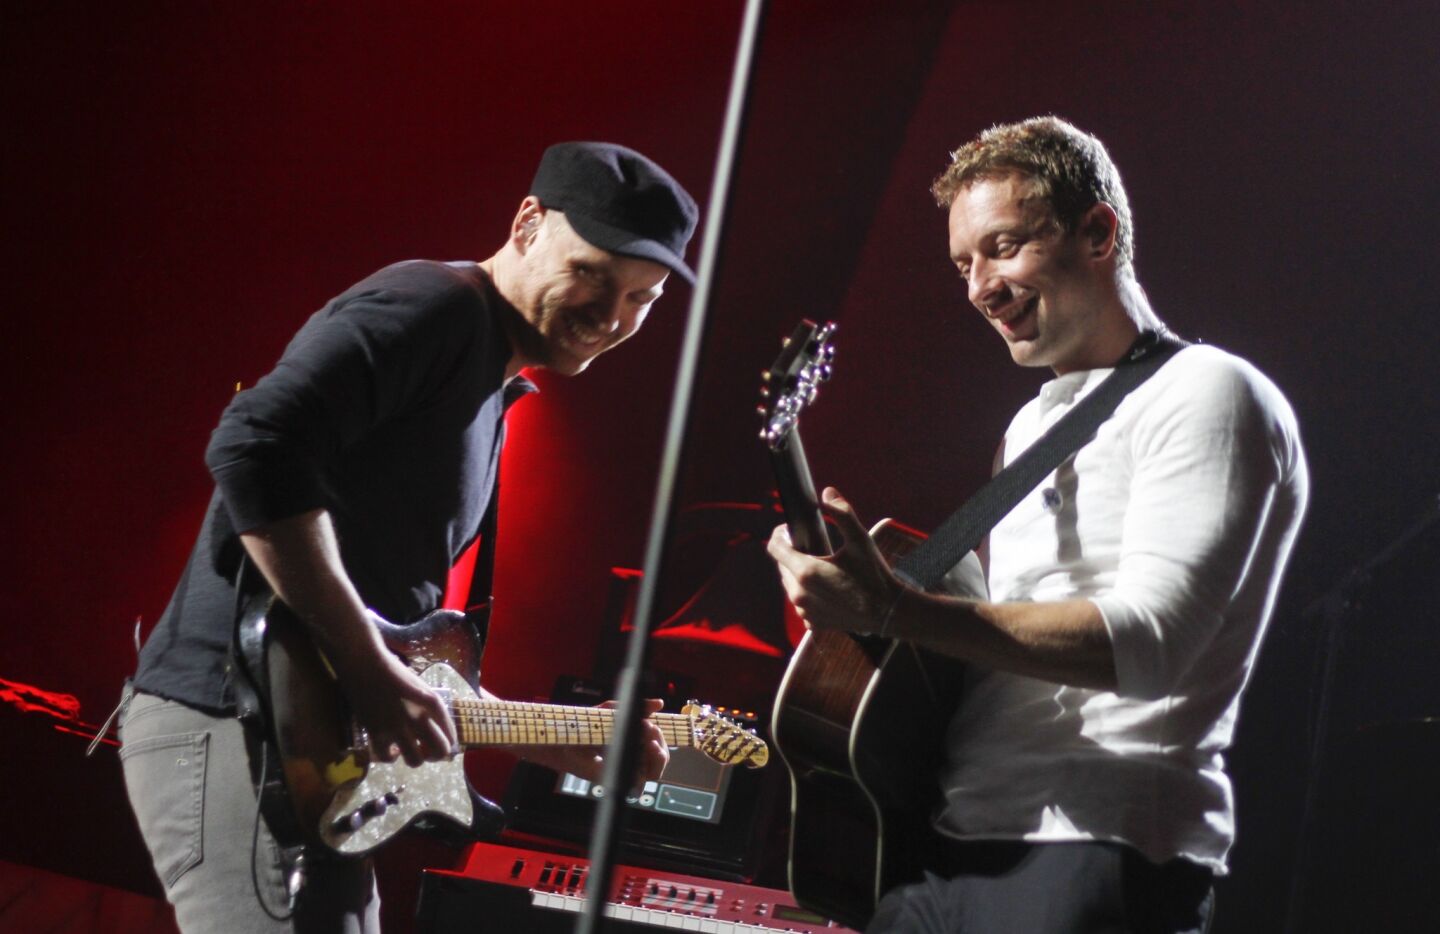 Coldplay's Chris Martin, right, and Jonny Buckland perform at the iTunes Festival during SXSW.